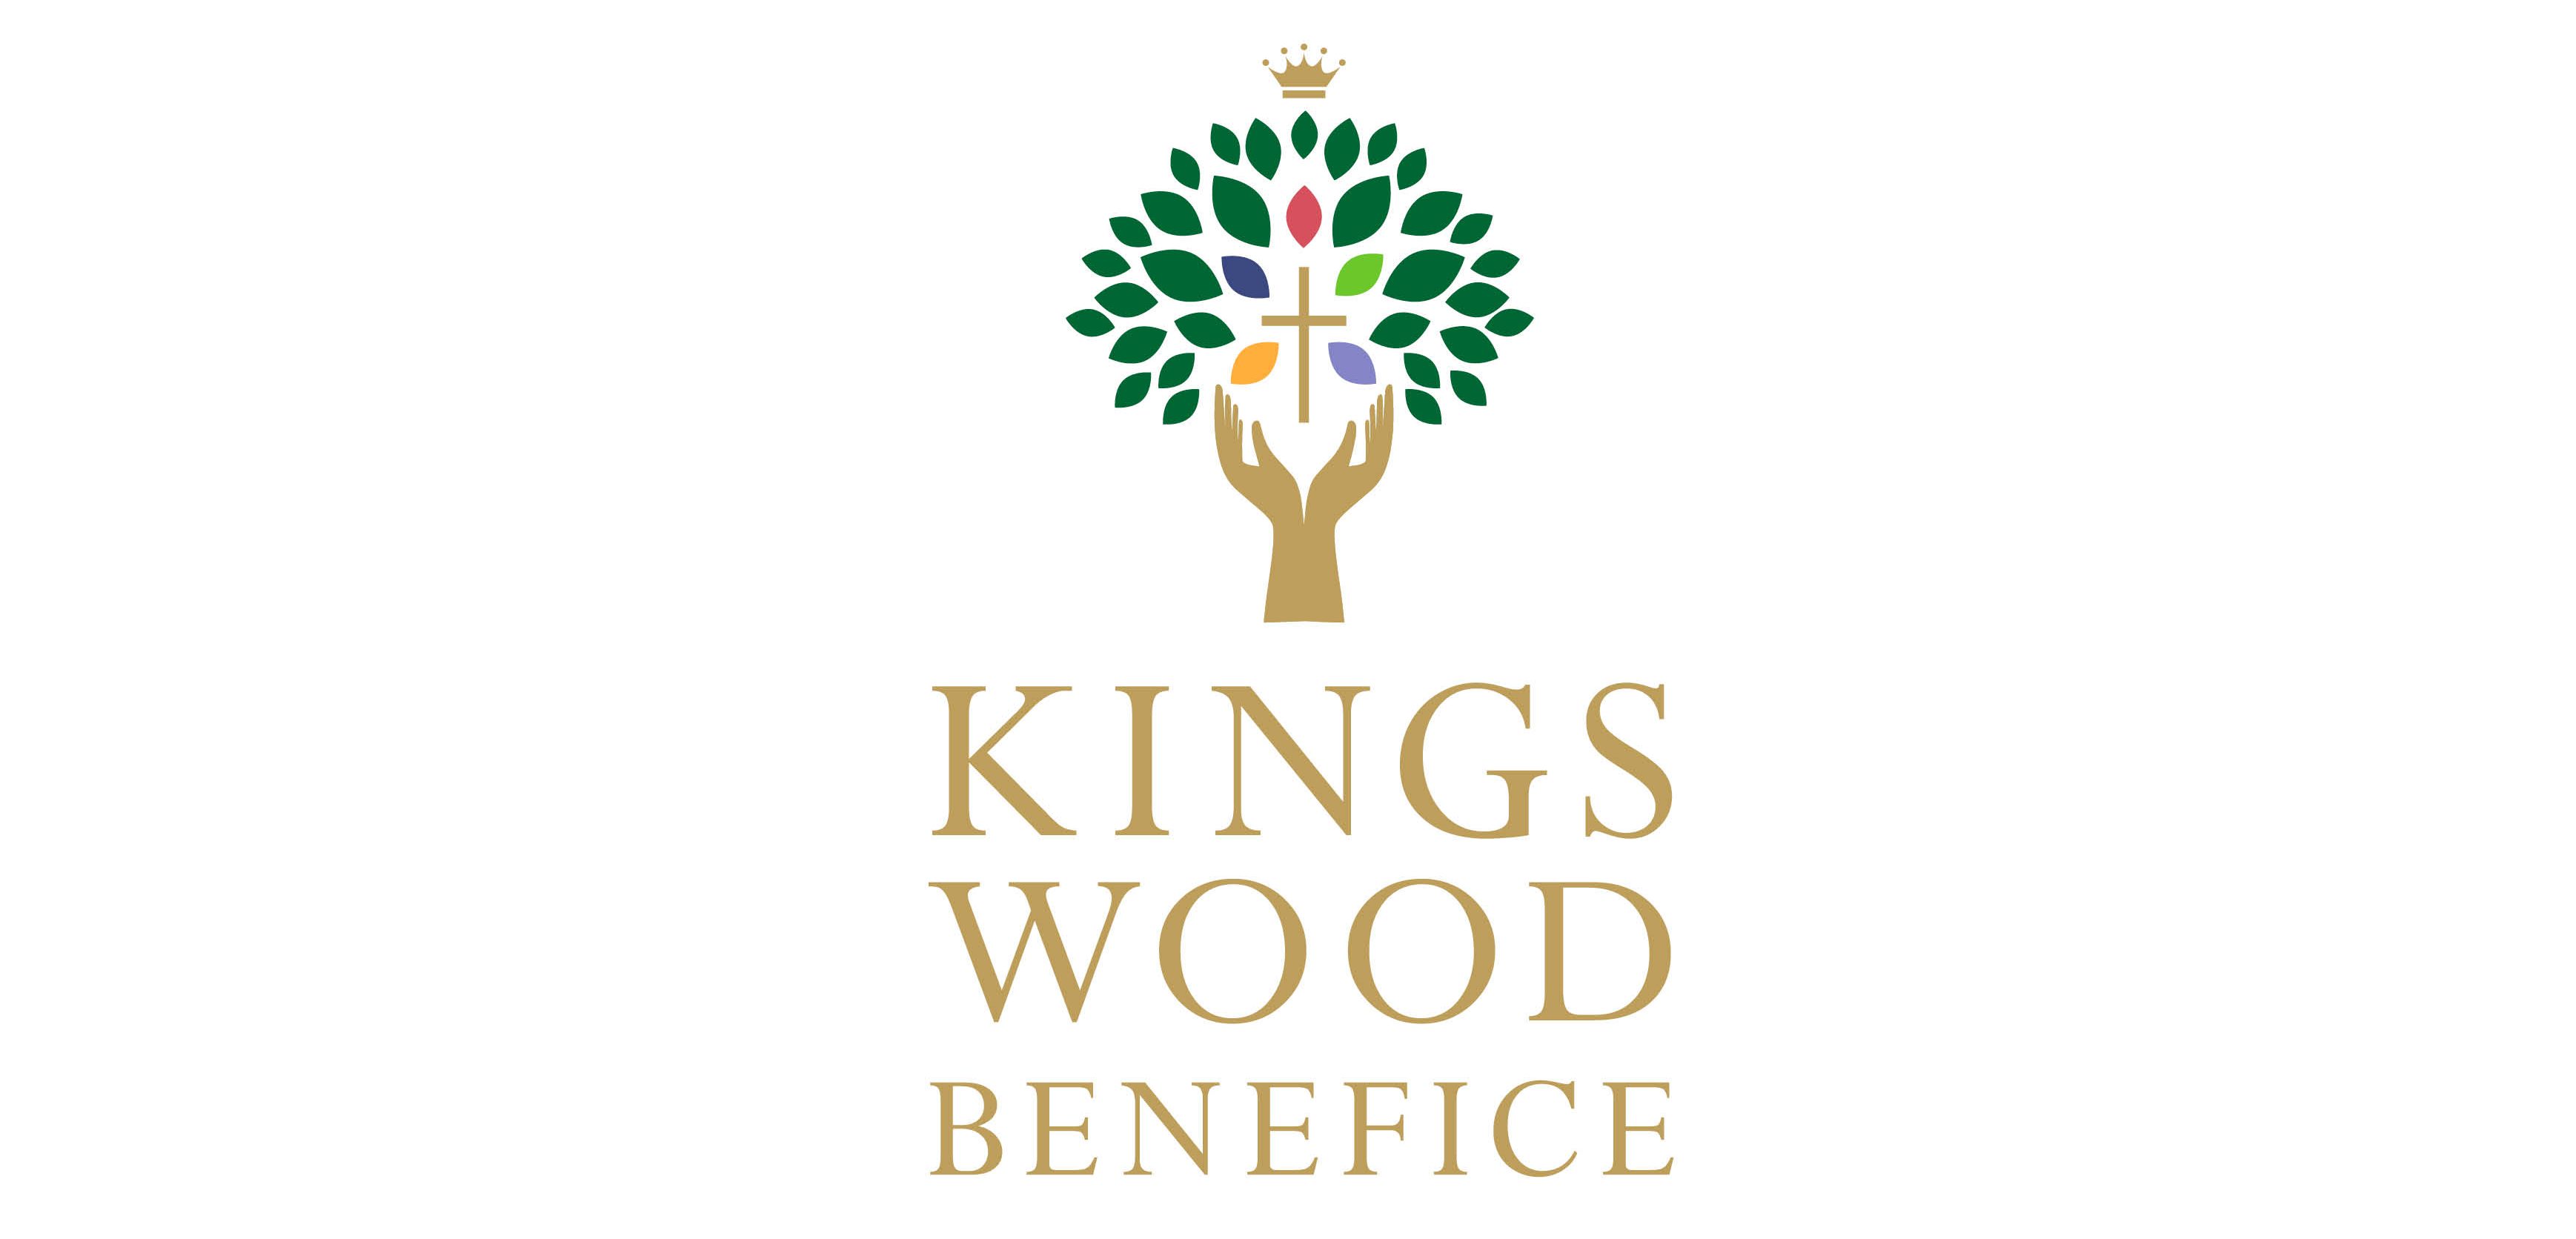 Welcome to The Kingswood Benefice